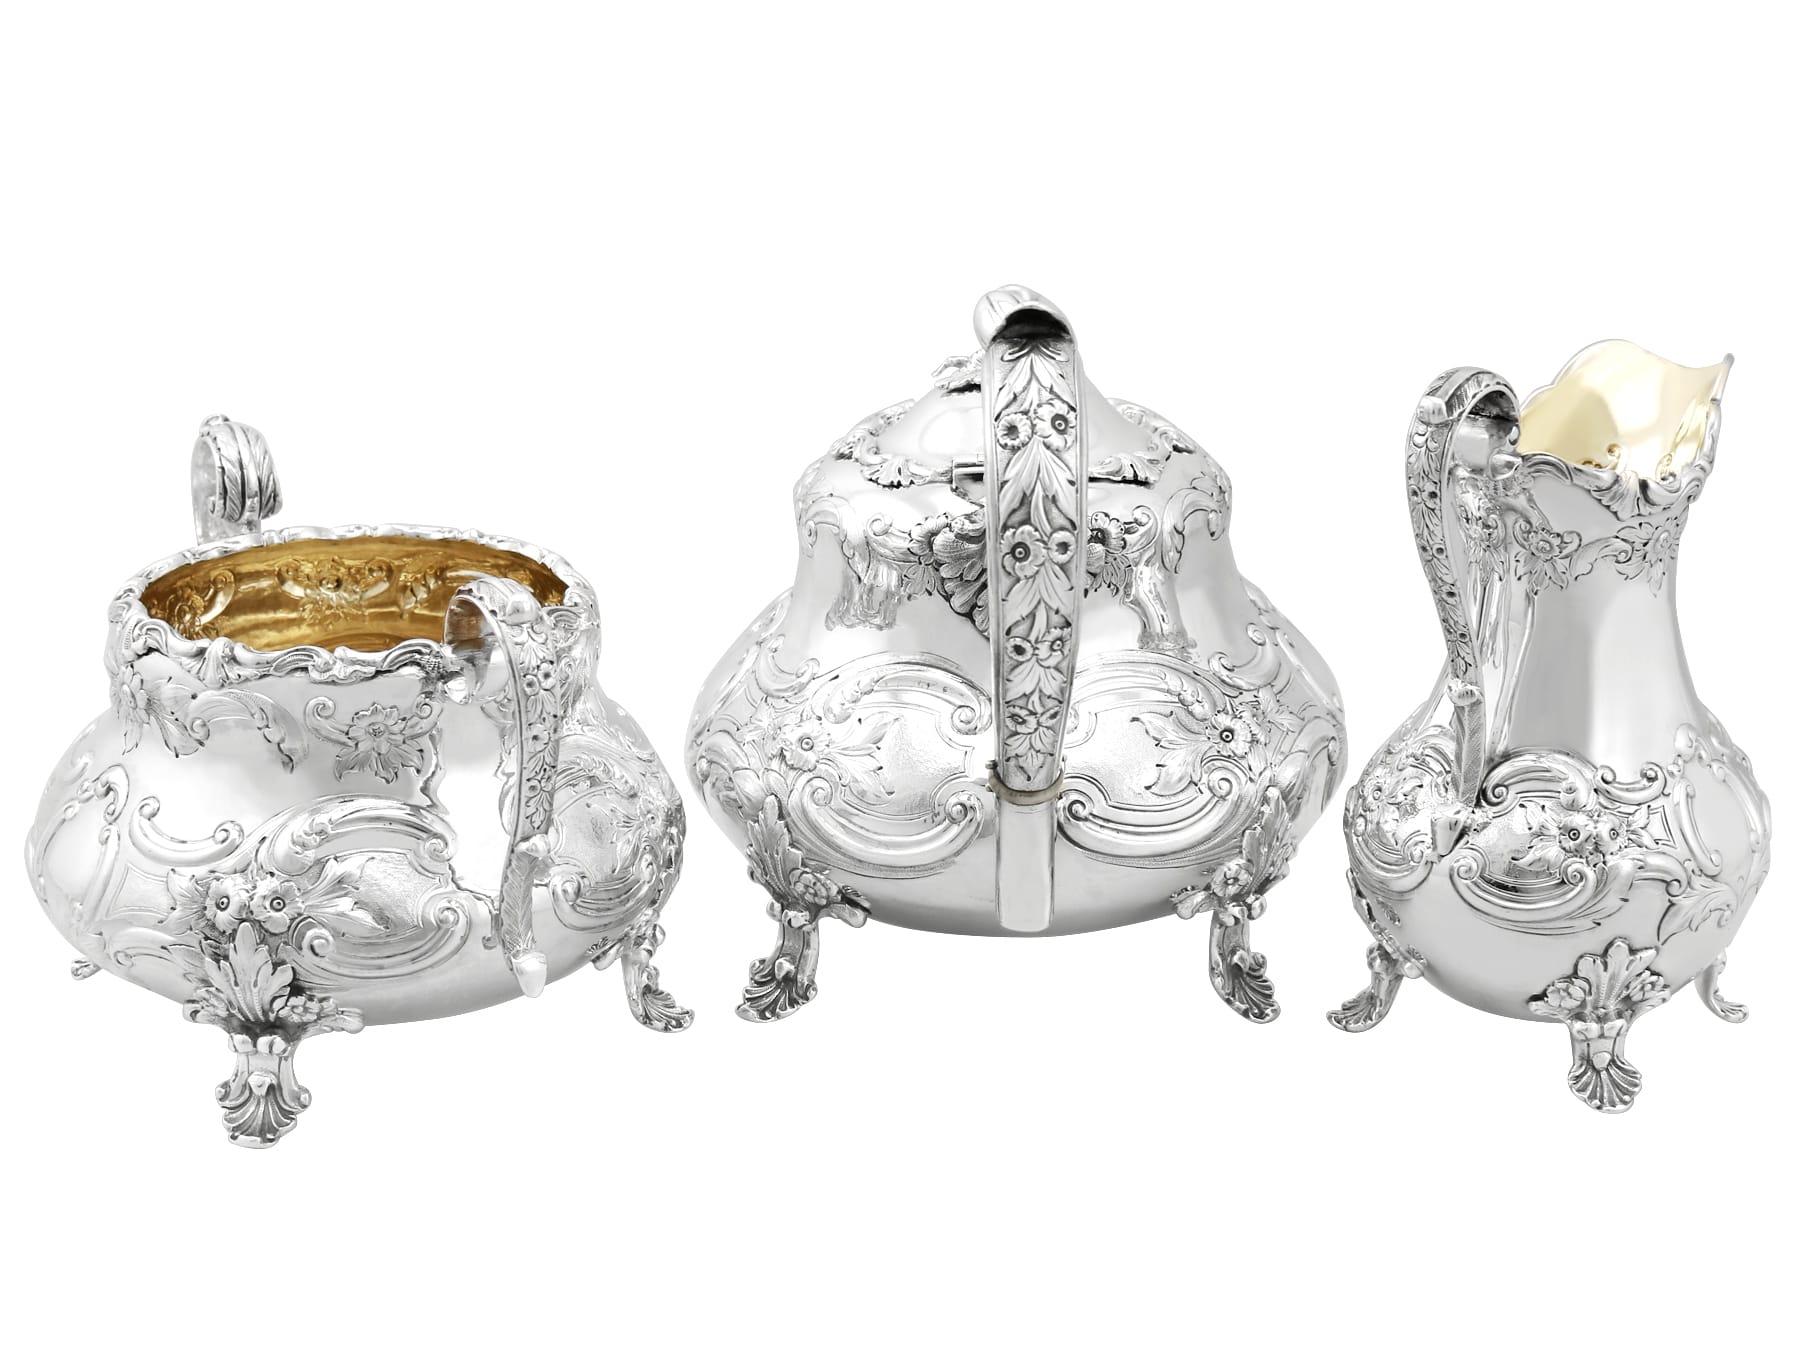 An exceptional, fine and impressive, antique Victorian English sterling silver three-piece tea service; part of our silver teaware collection.

This magnificent antique Victorian sterling silver three-piece tea set consists of a teapot, sugar bowl